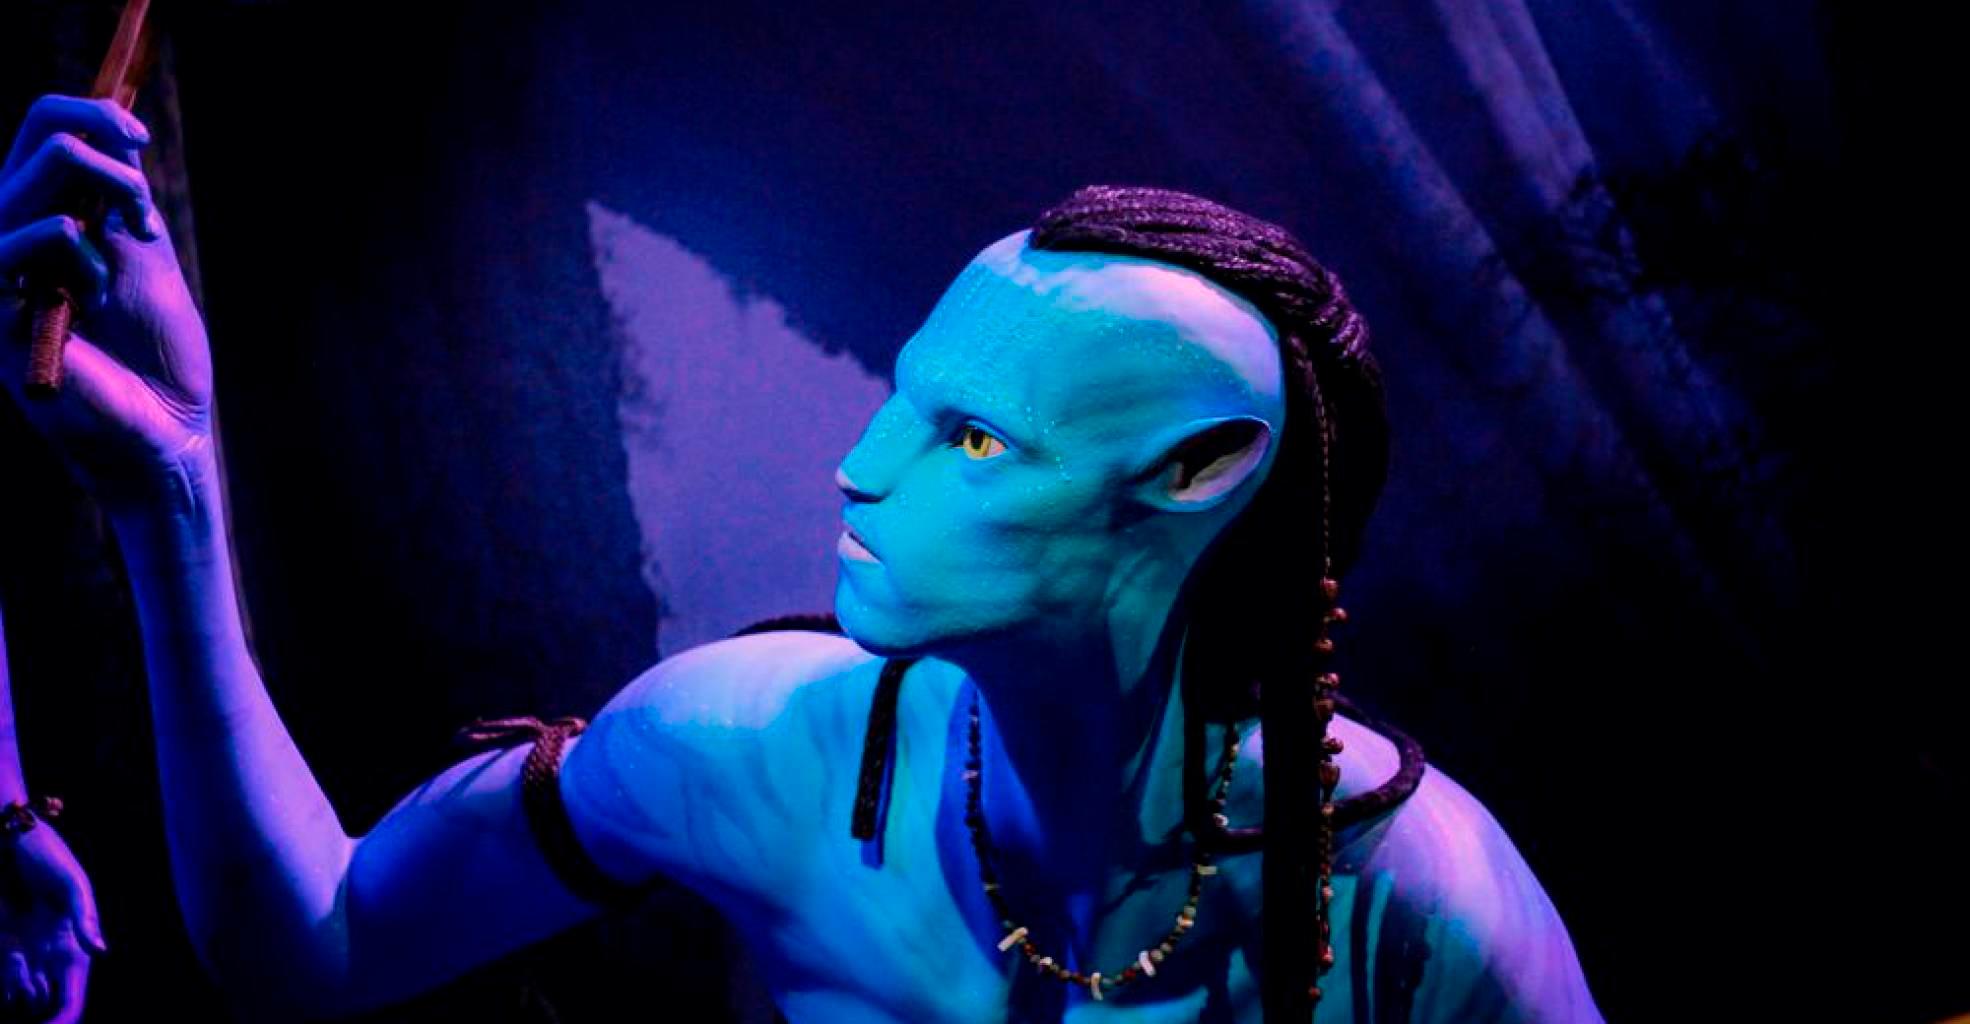 ‘Avatar’ would like to be the most interesting storyteller